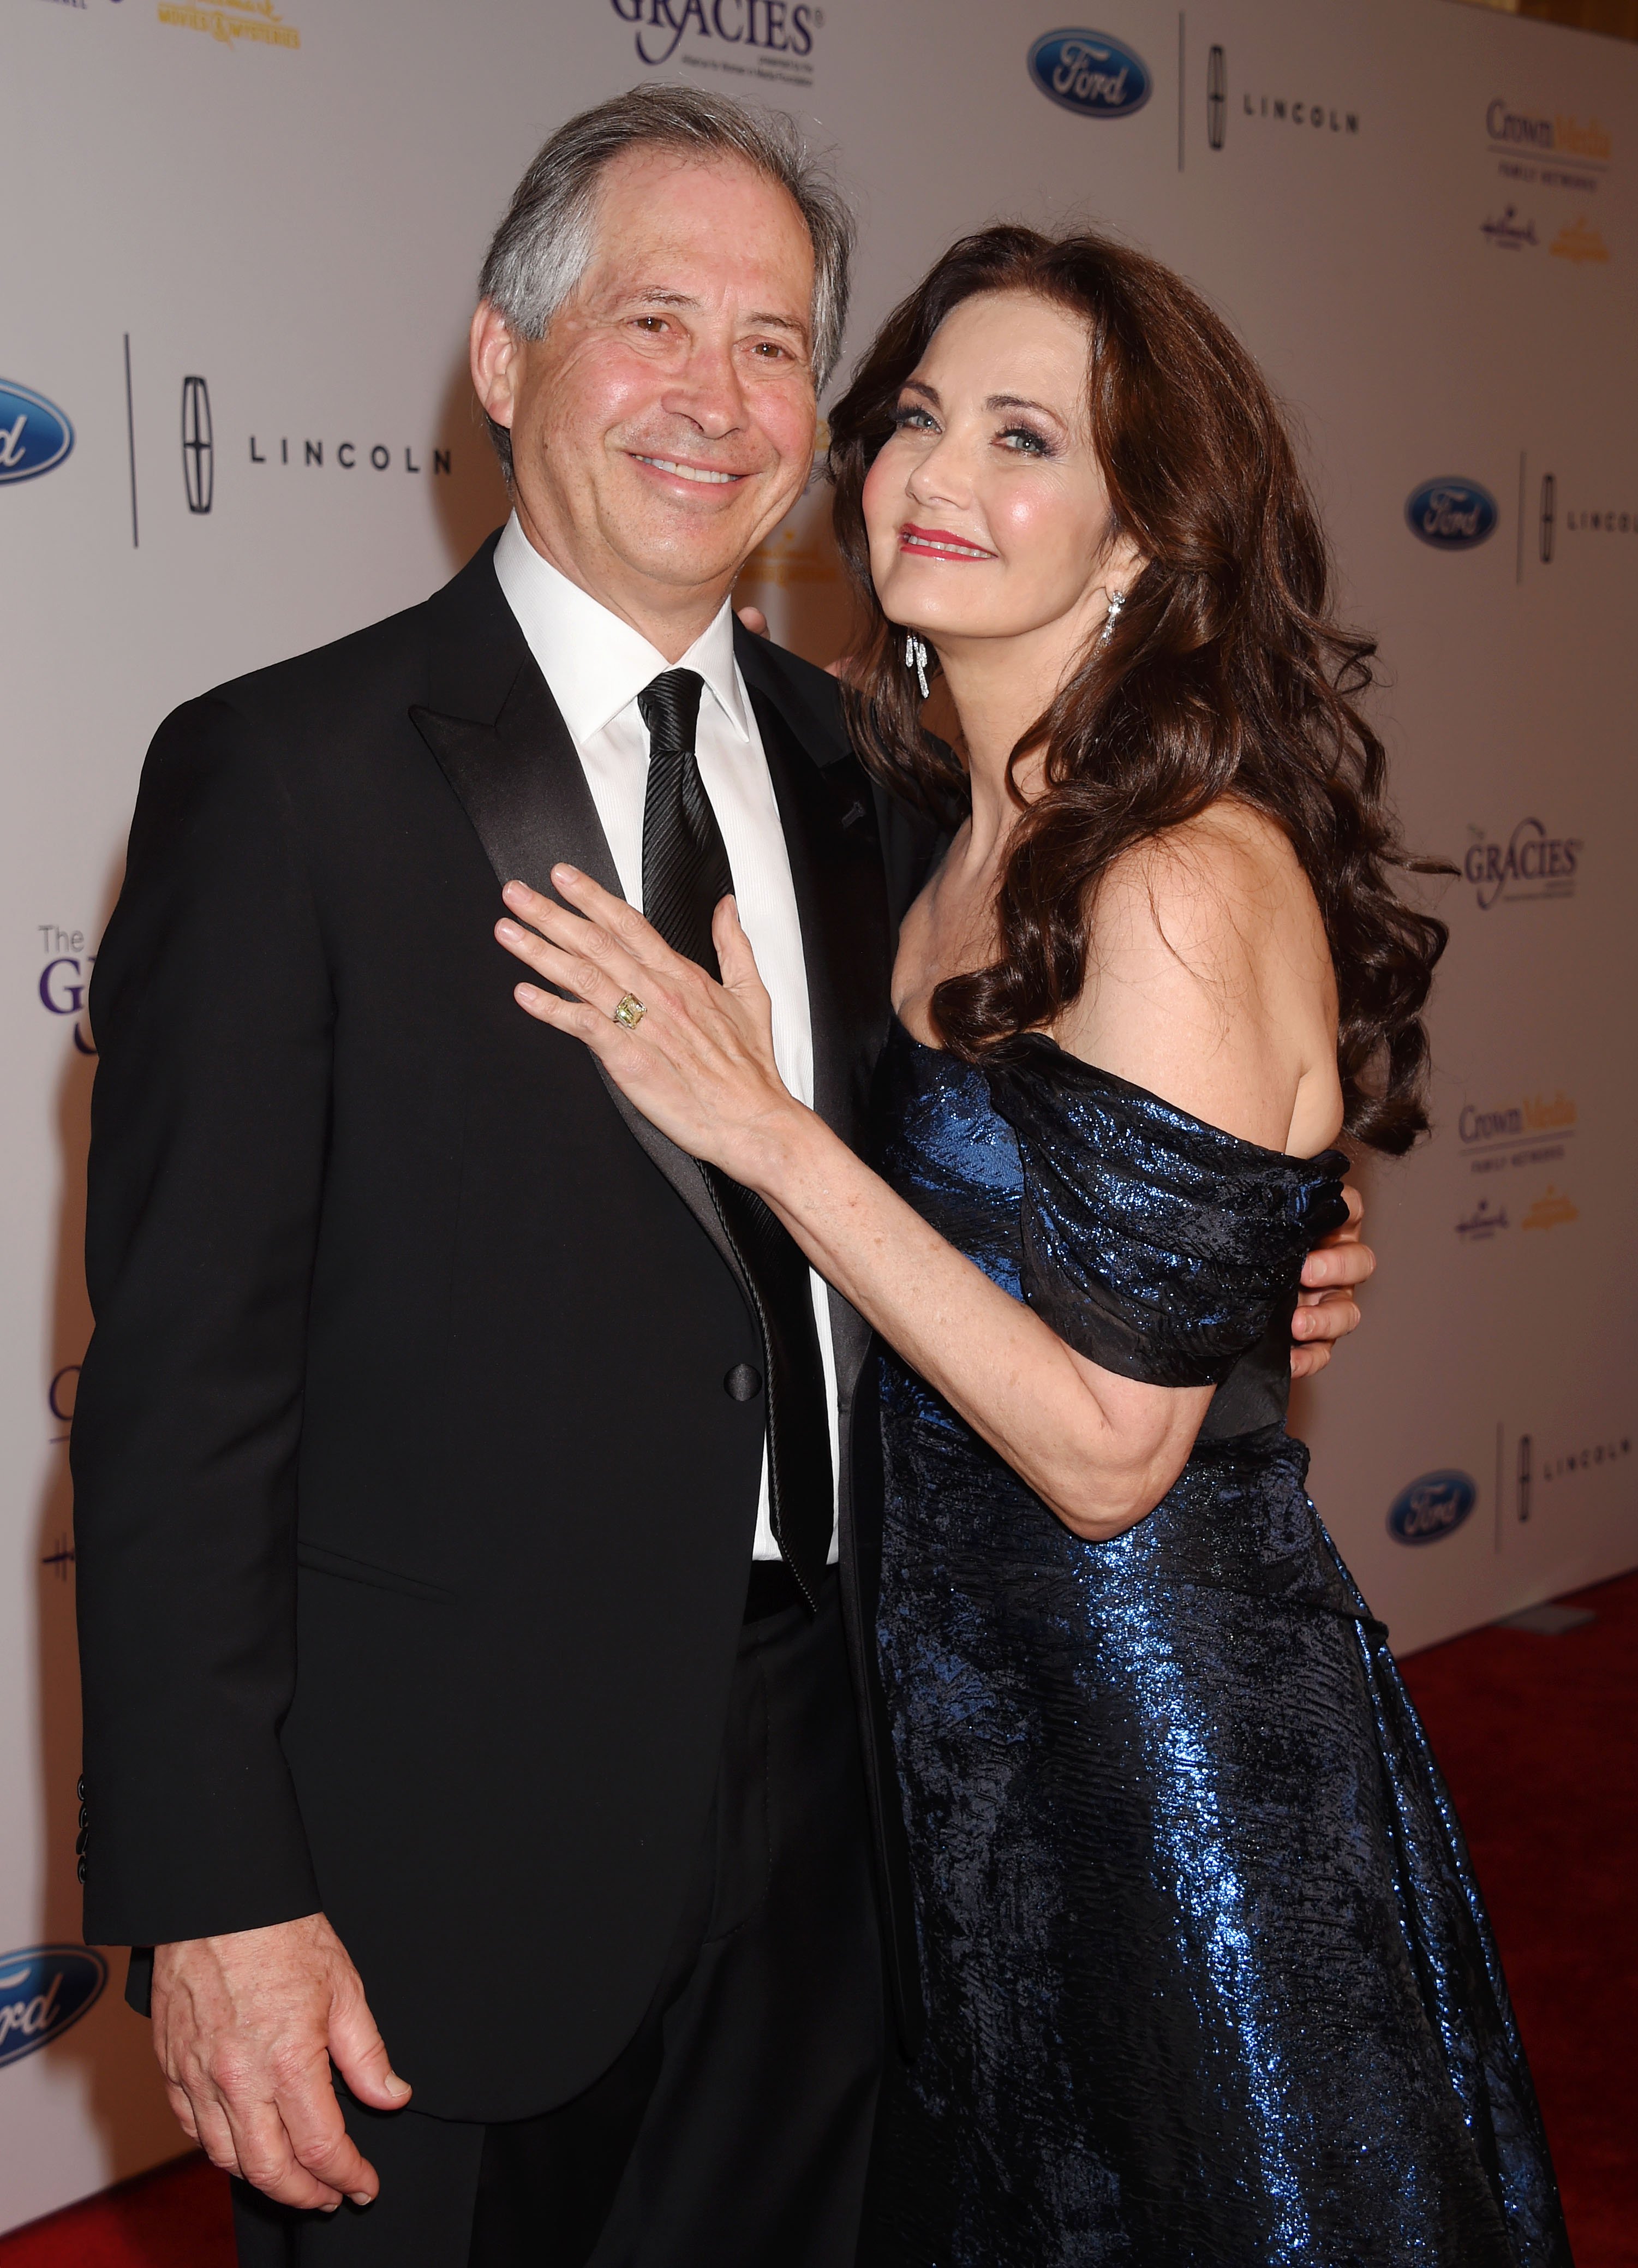 Lynda Carter and spouse/businessman Robert A. Altman attend the 41st Annual Gracie Awards at Regent Beverly Wilshire Hotel on May 24, 2016  | Photo: Getty Images